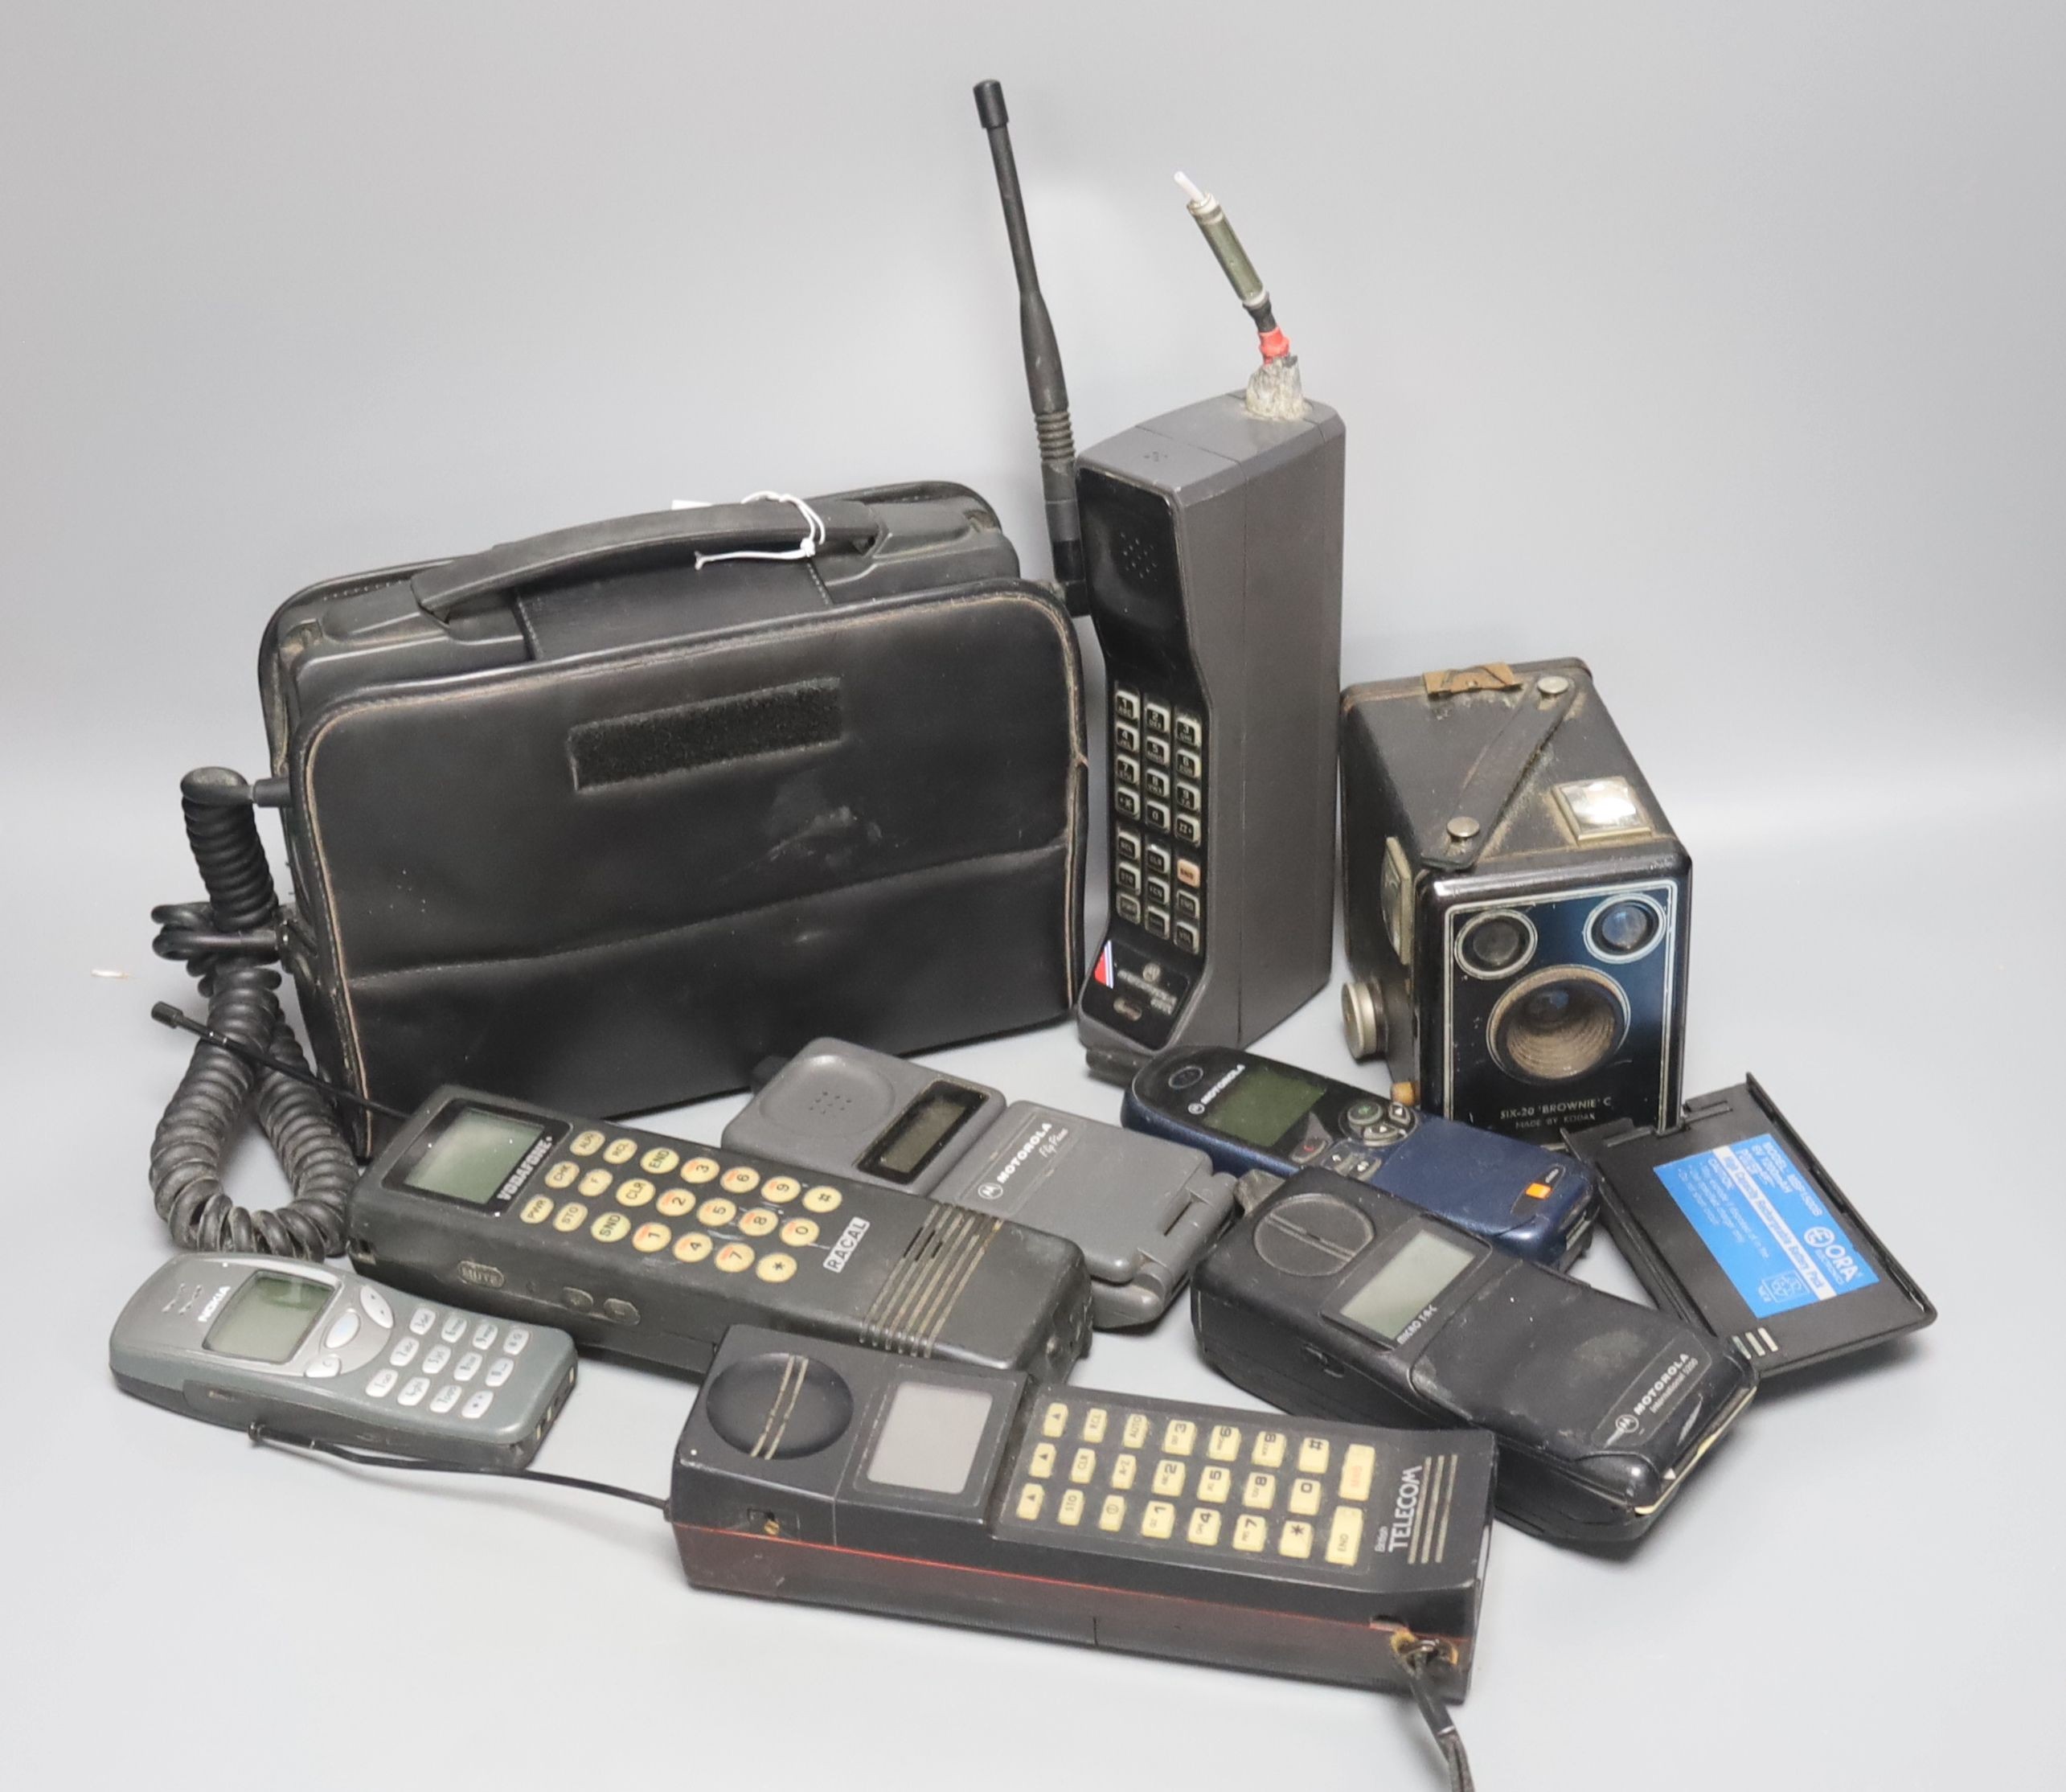 Eight early/retro mobile phones and a Box Brownie